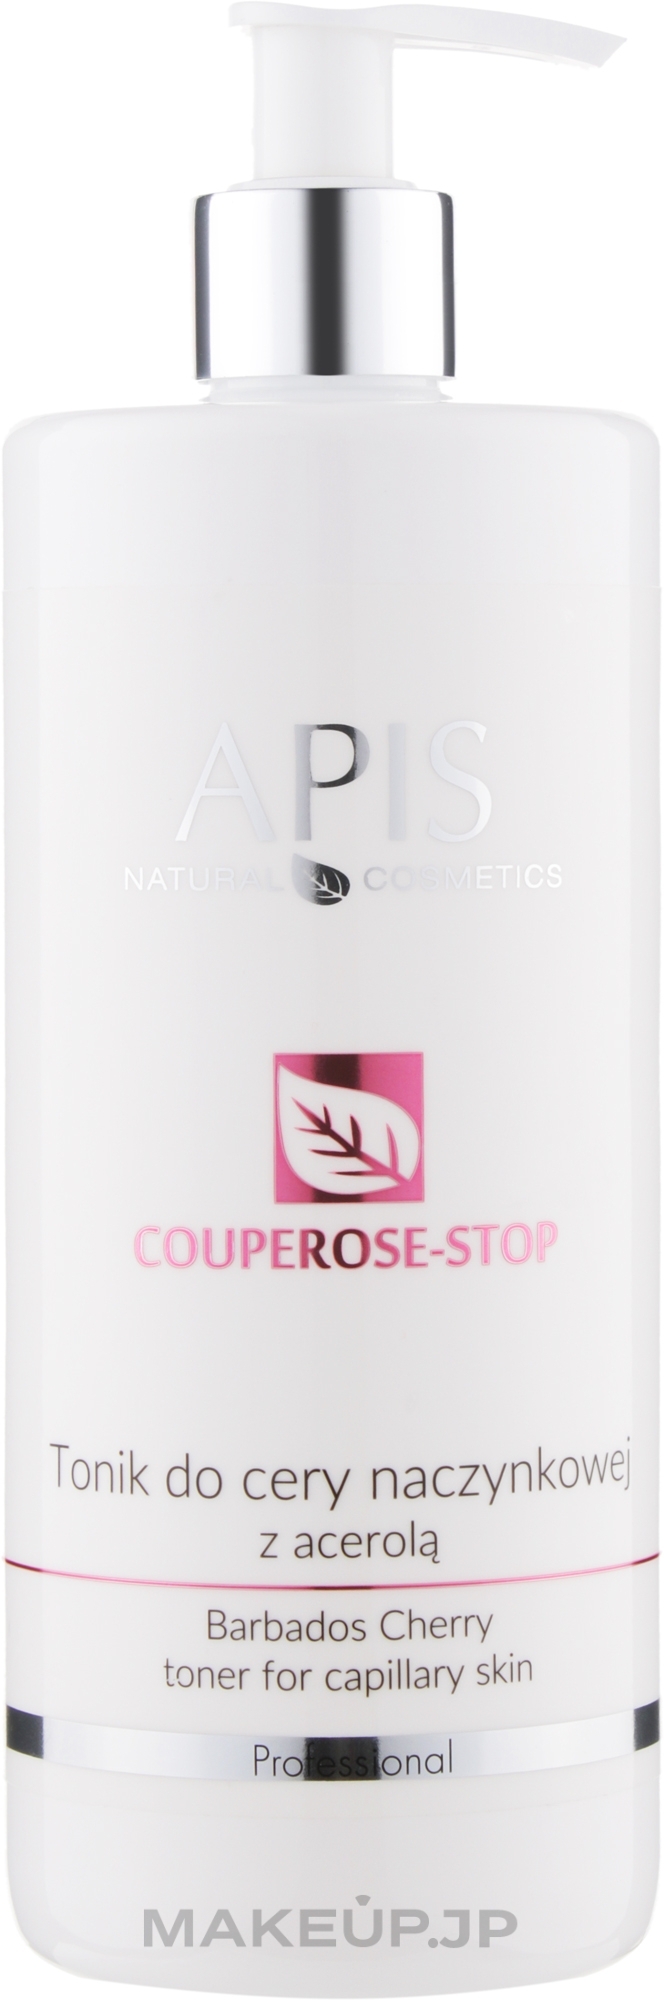 Soft Anti-Couperose Face Tonic with Acerola Extract - Apis Professional Couperose-Stop Barbados Cherry Tonner — photo 500 ml